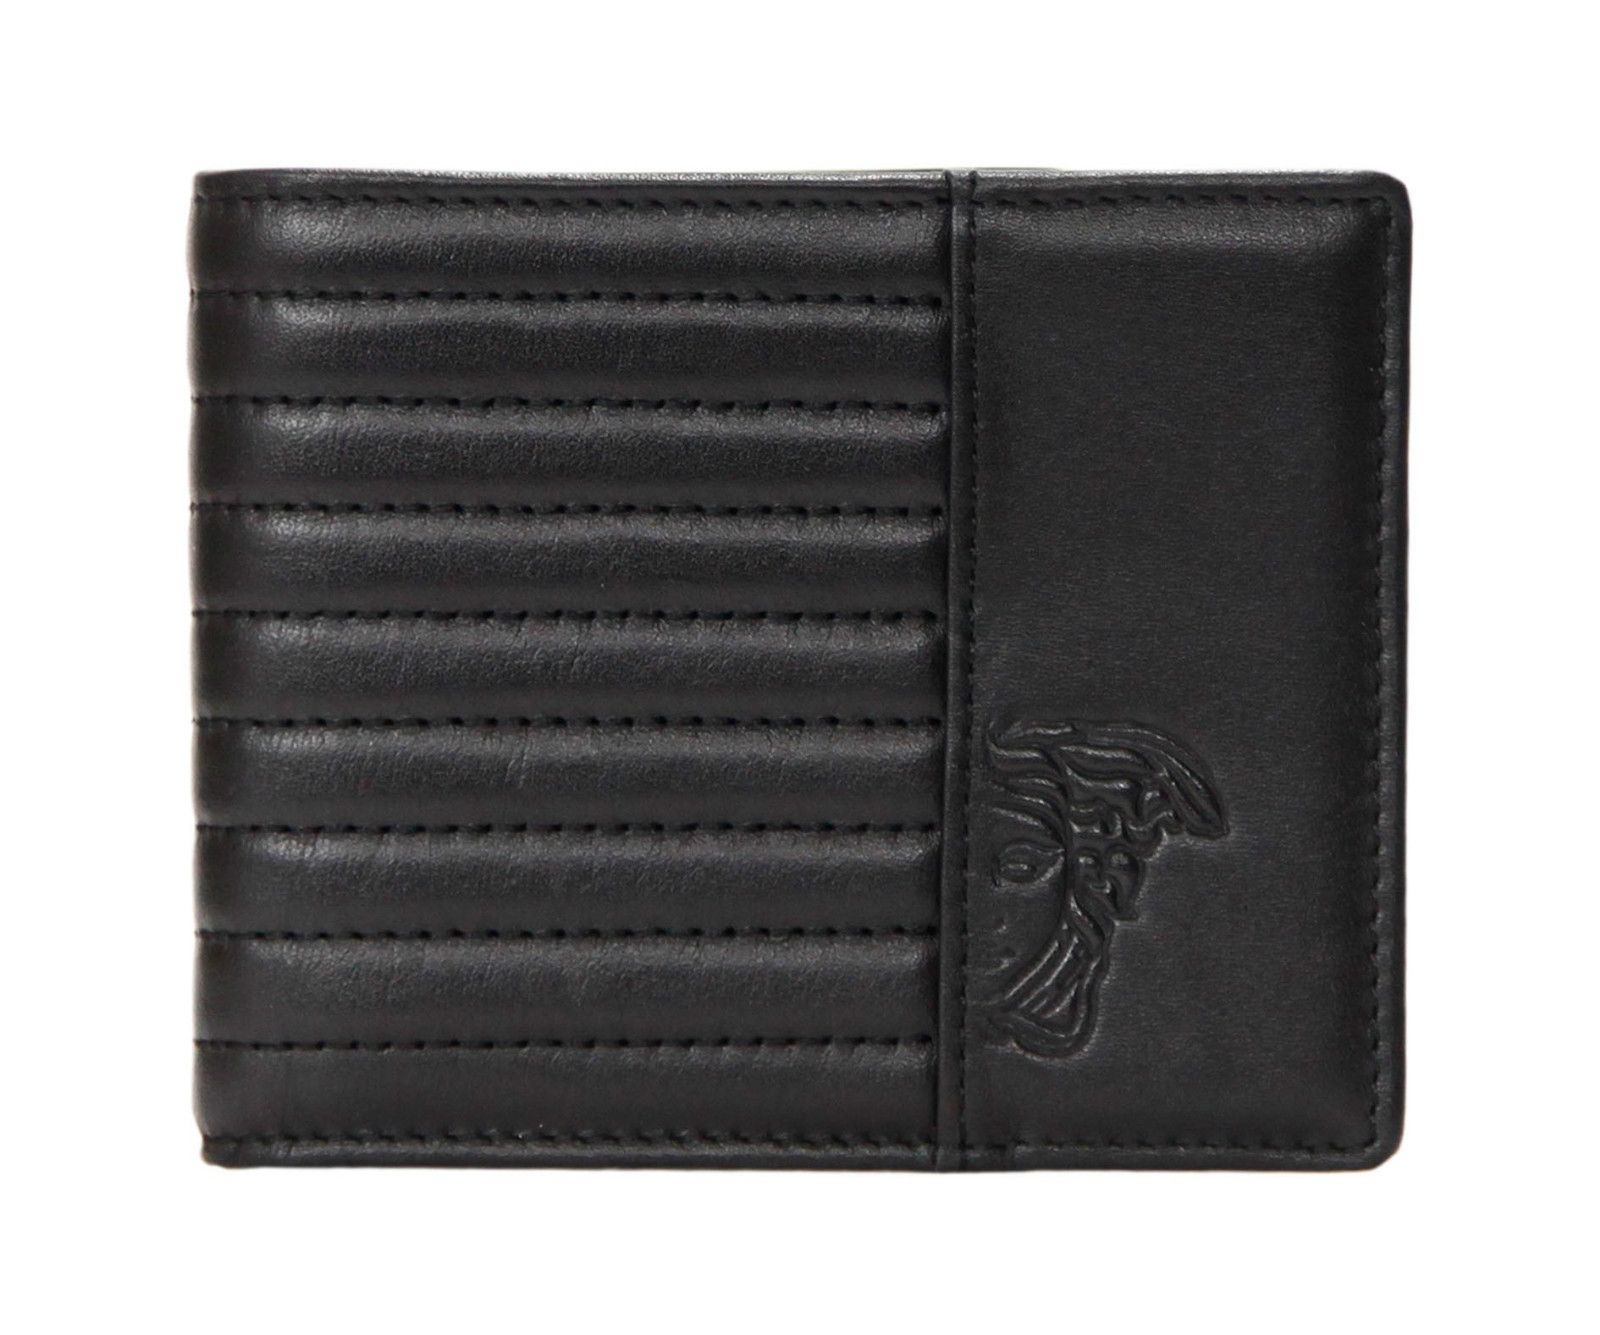 Versace Collection Medusa Logo Quilted Black Leather Wallet